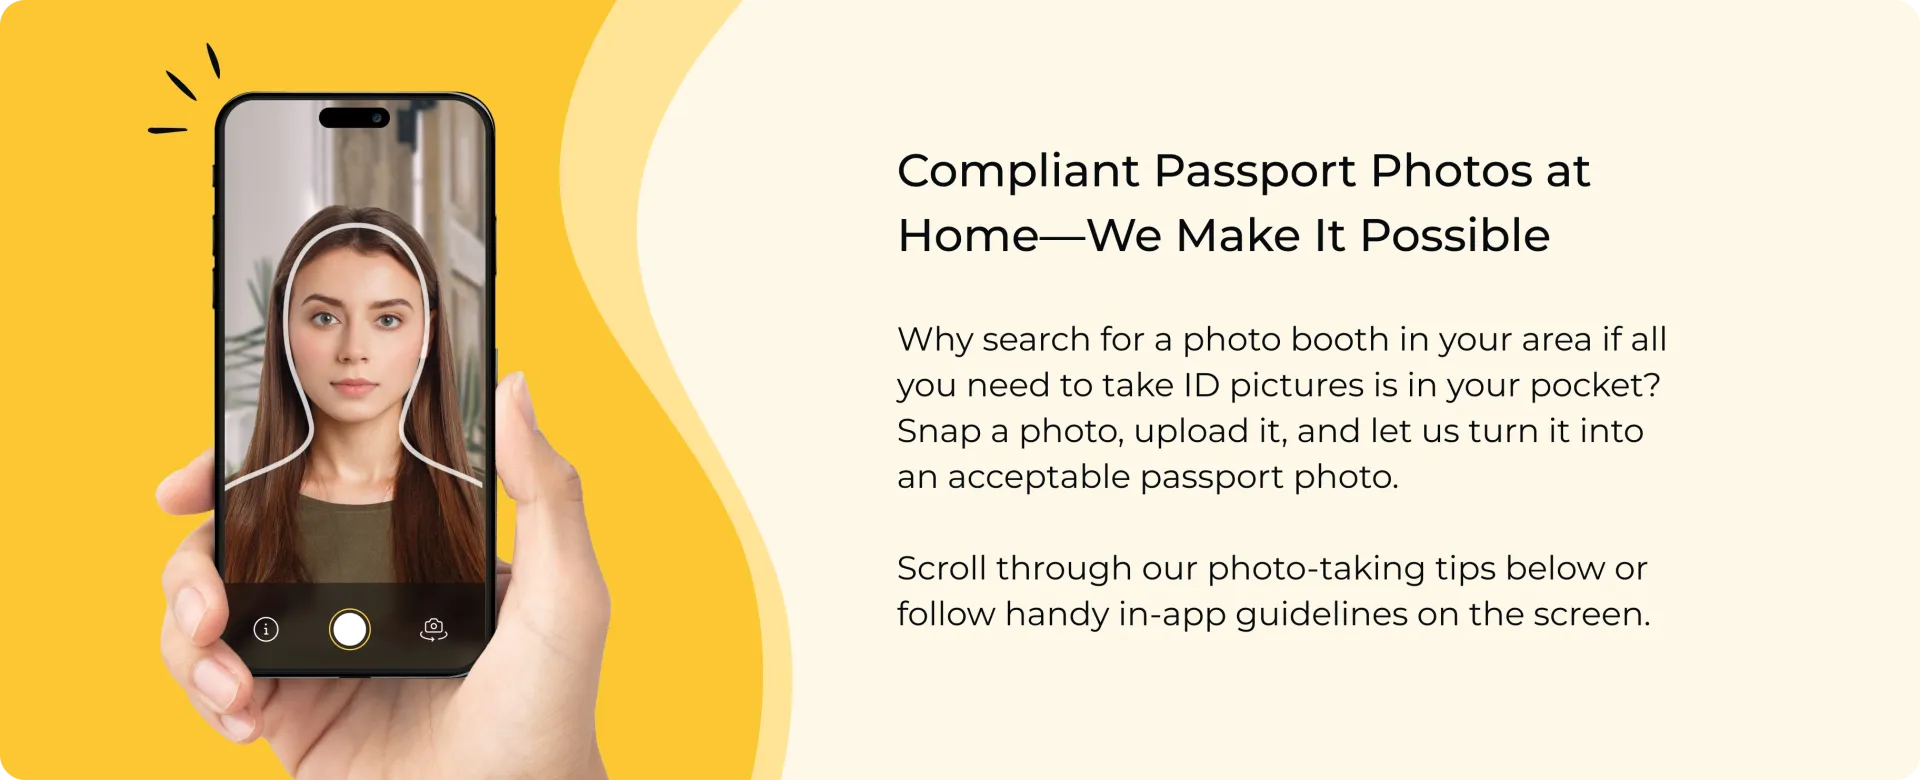 An image explaining that you can get passport photos that meet government requirements using only a mobile app at home.